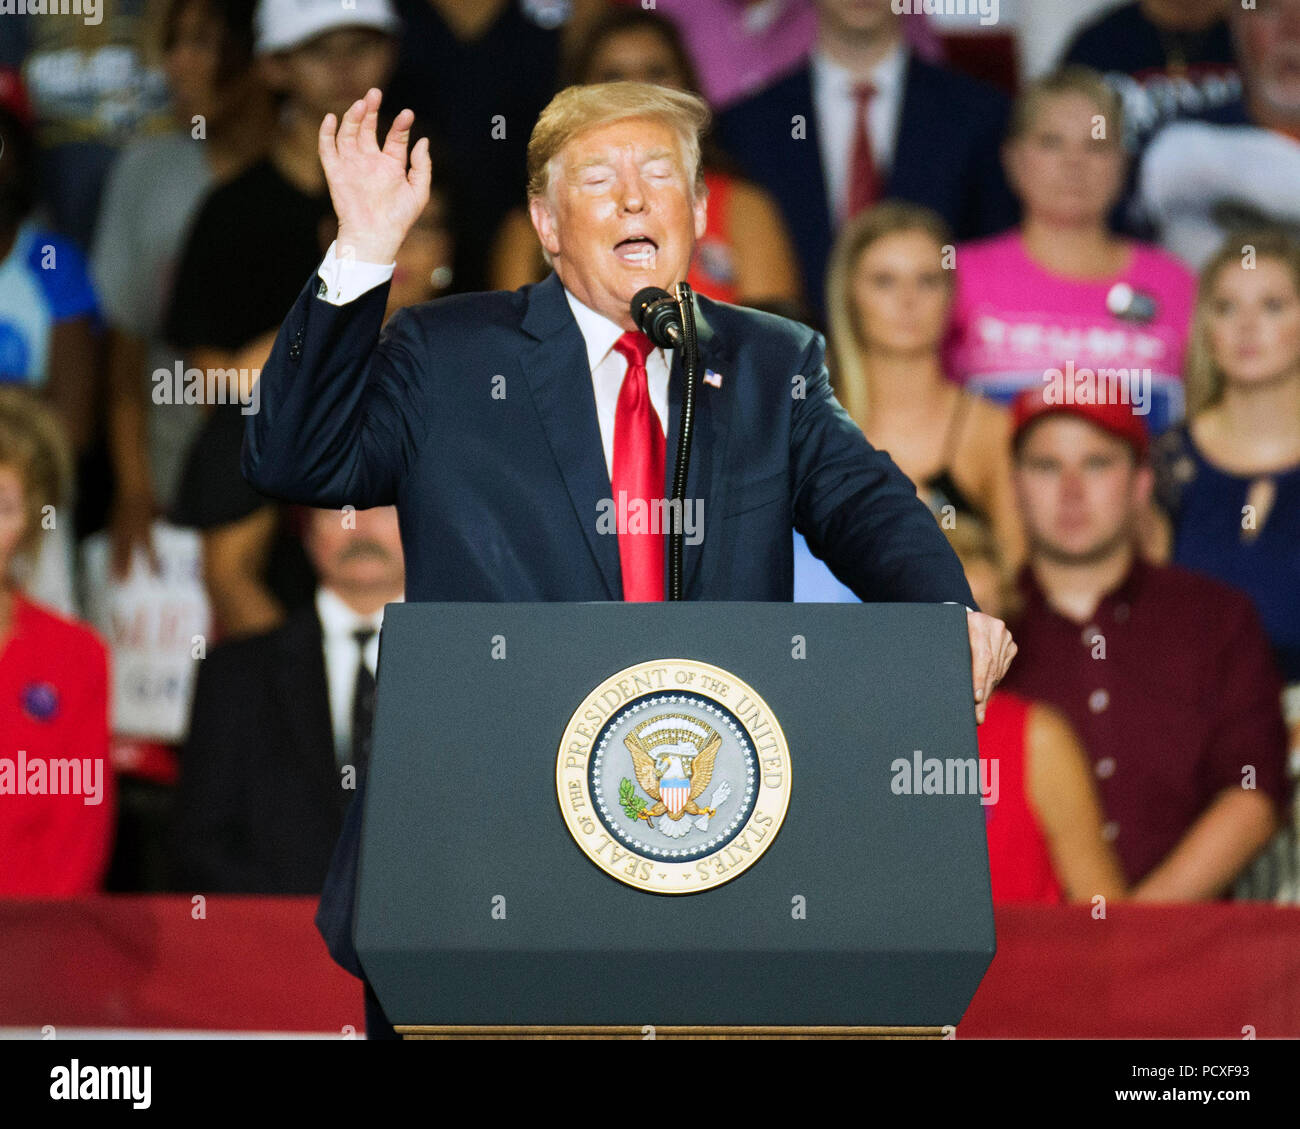 Ohio, USA. 4 August 2018. Donald Trump speaks to the crowd at the Make America Great Again Rally in Powell, Ohio USA. Brent Clark/Alamy Live News Stock Photo